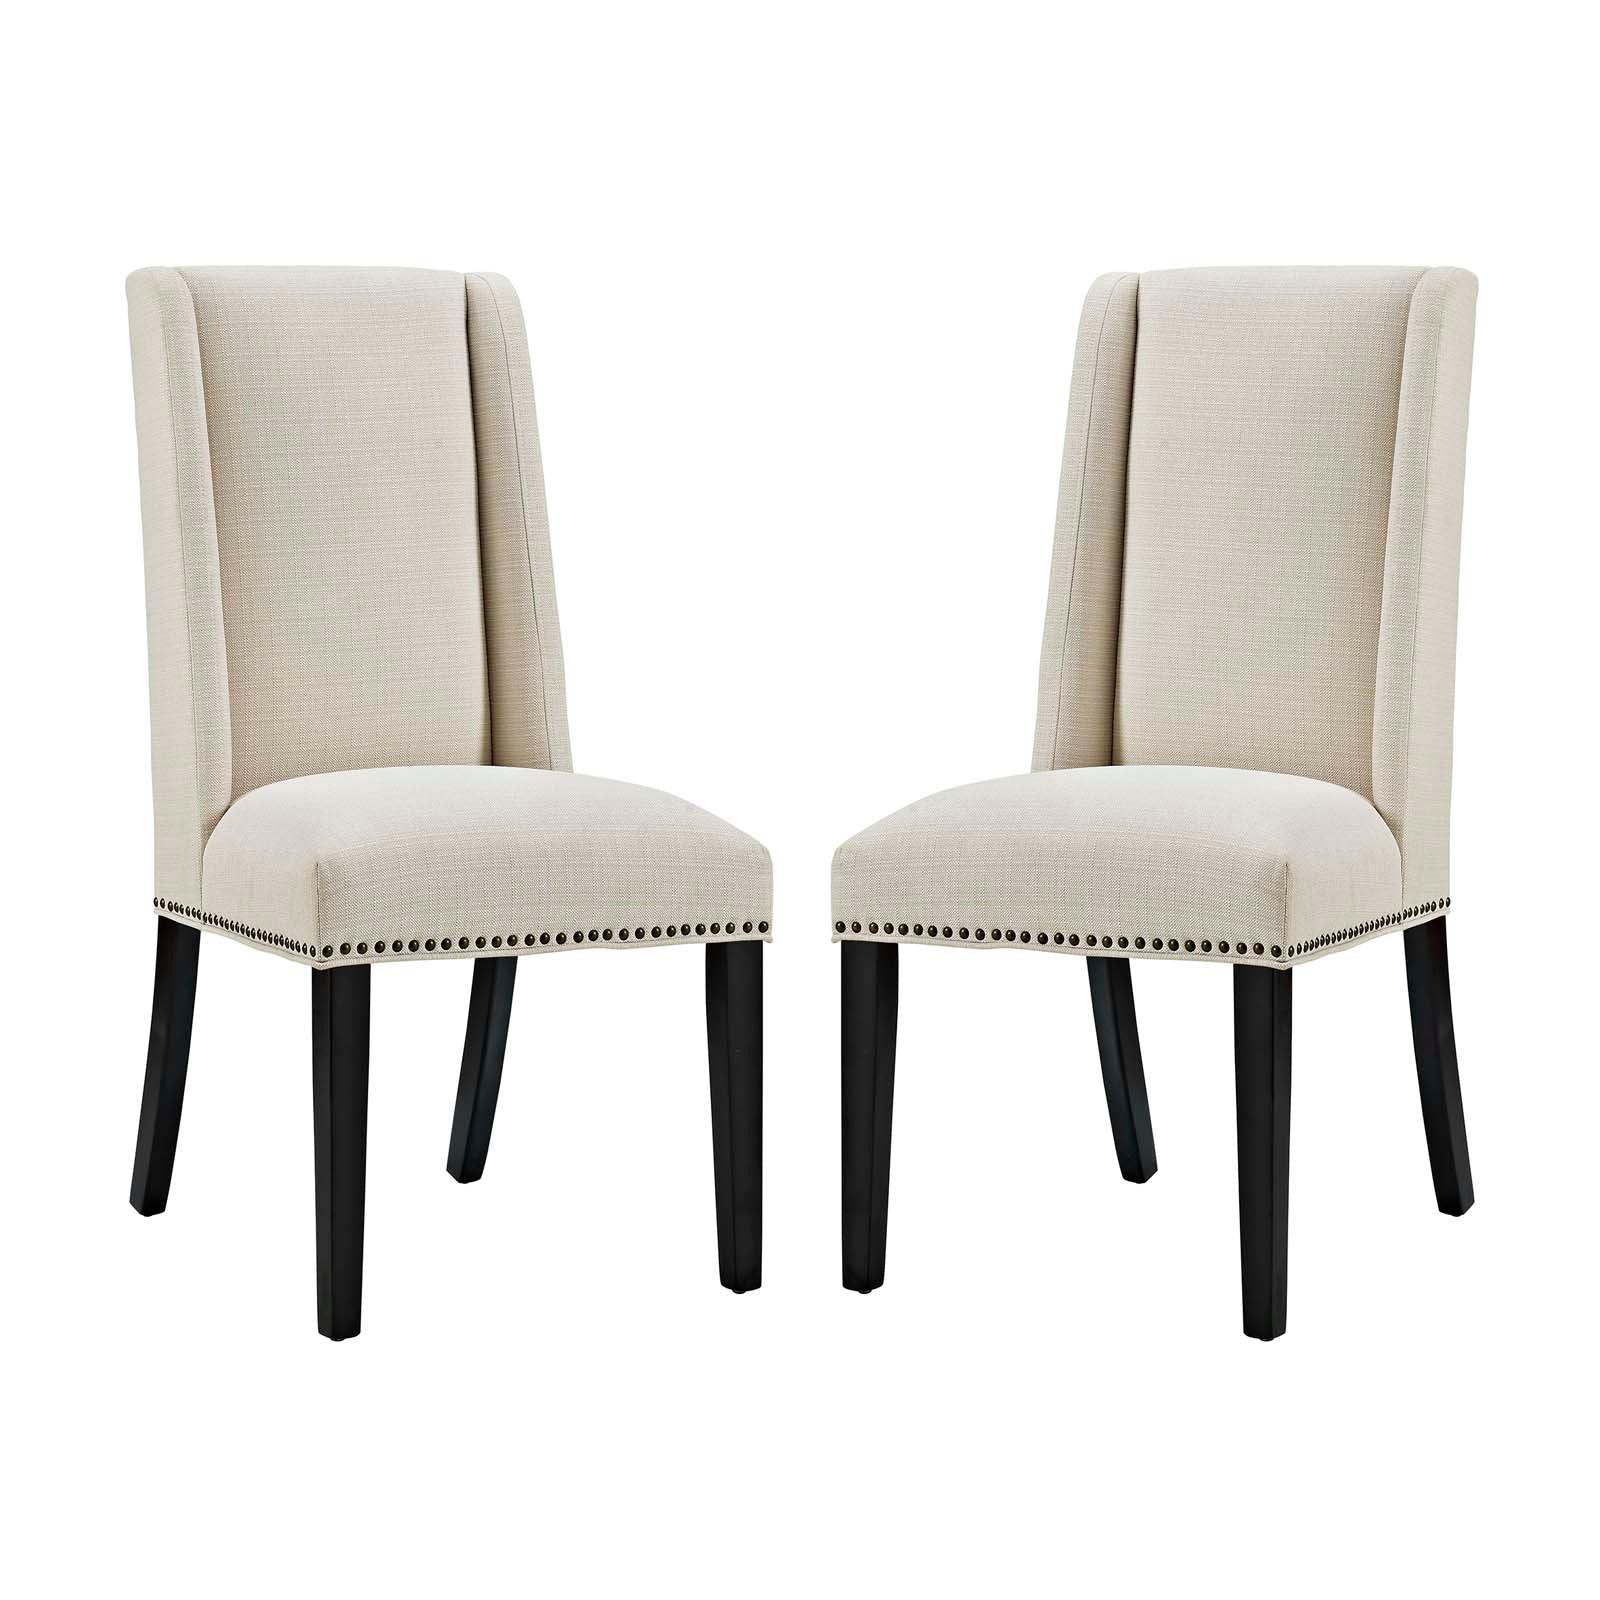 Modway Baron Dining Chair Fabric Set of 2 FredCo